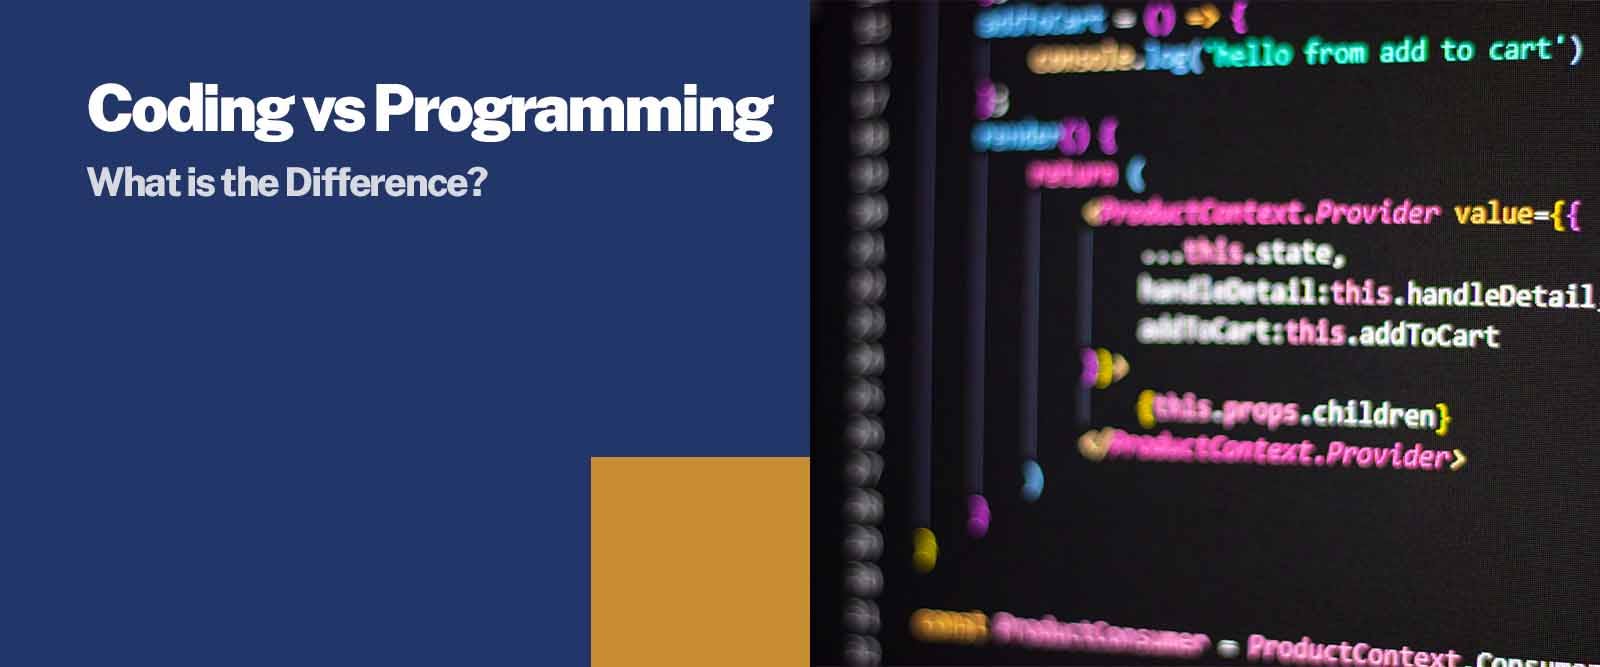 Coding vs Programming What is the Difference